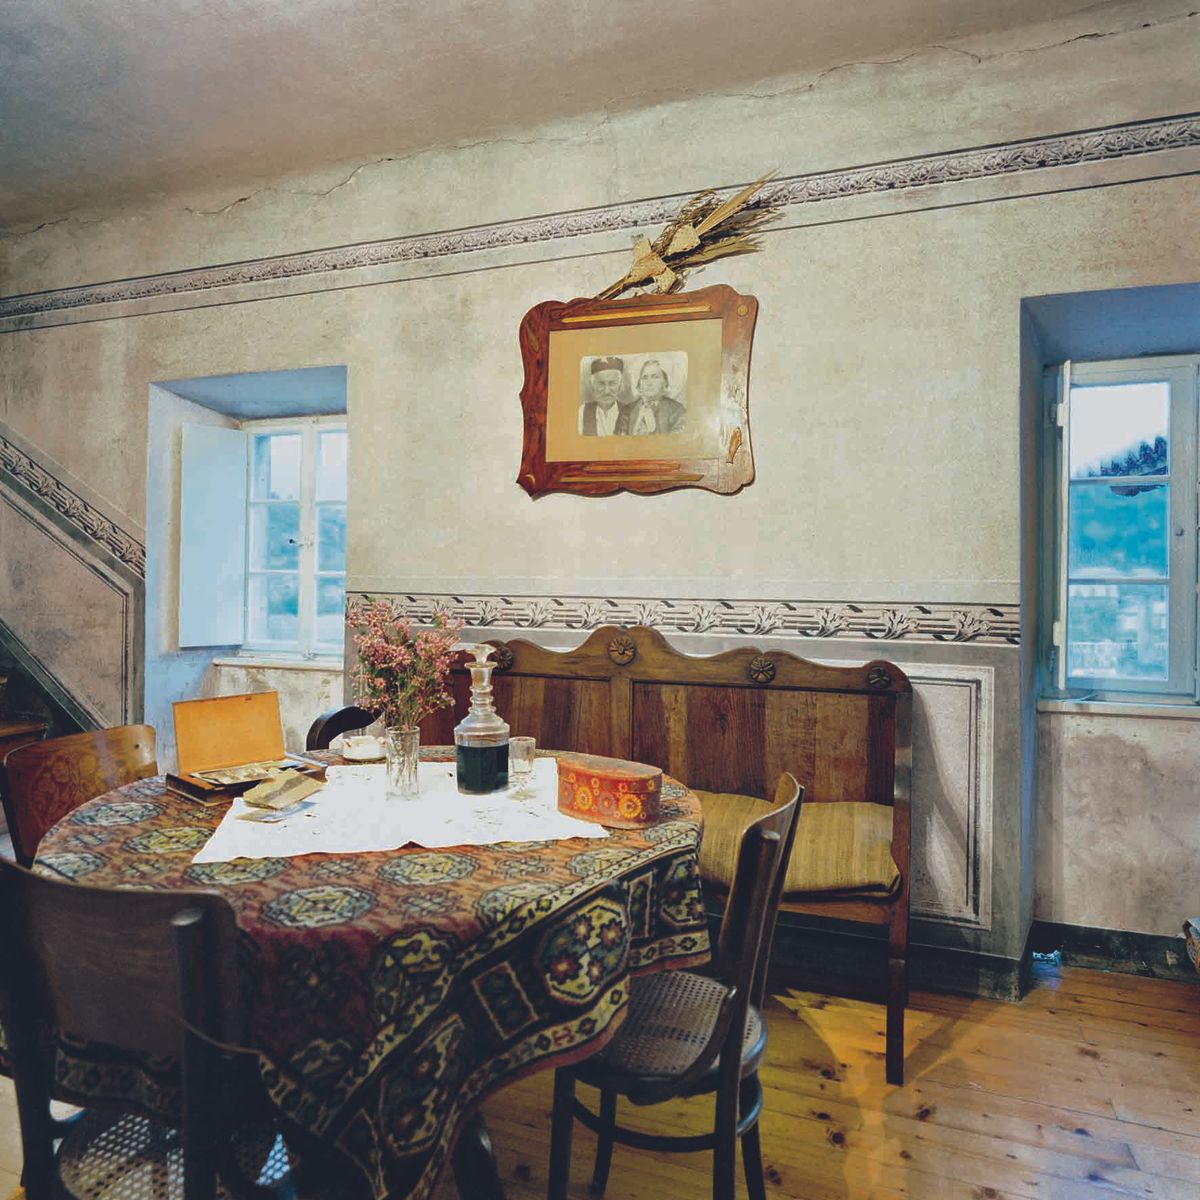 Before: The Radic house in a village south of Dubrovnik, November 1990 © Damir Fabijanic